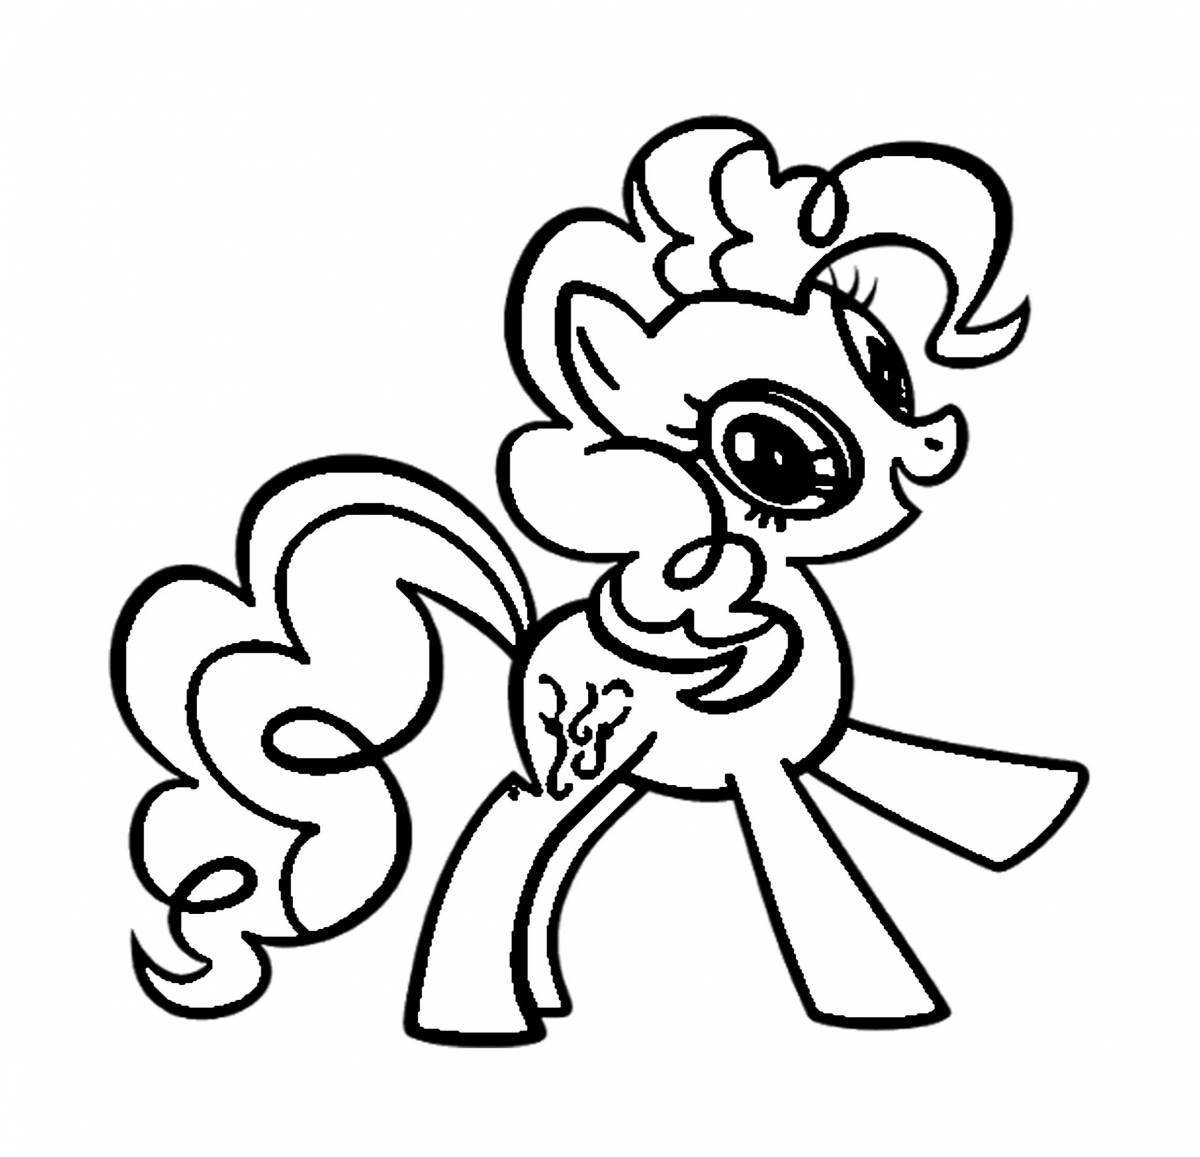 Colorful mini pony coloring page